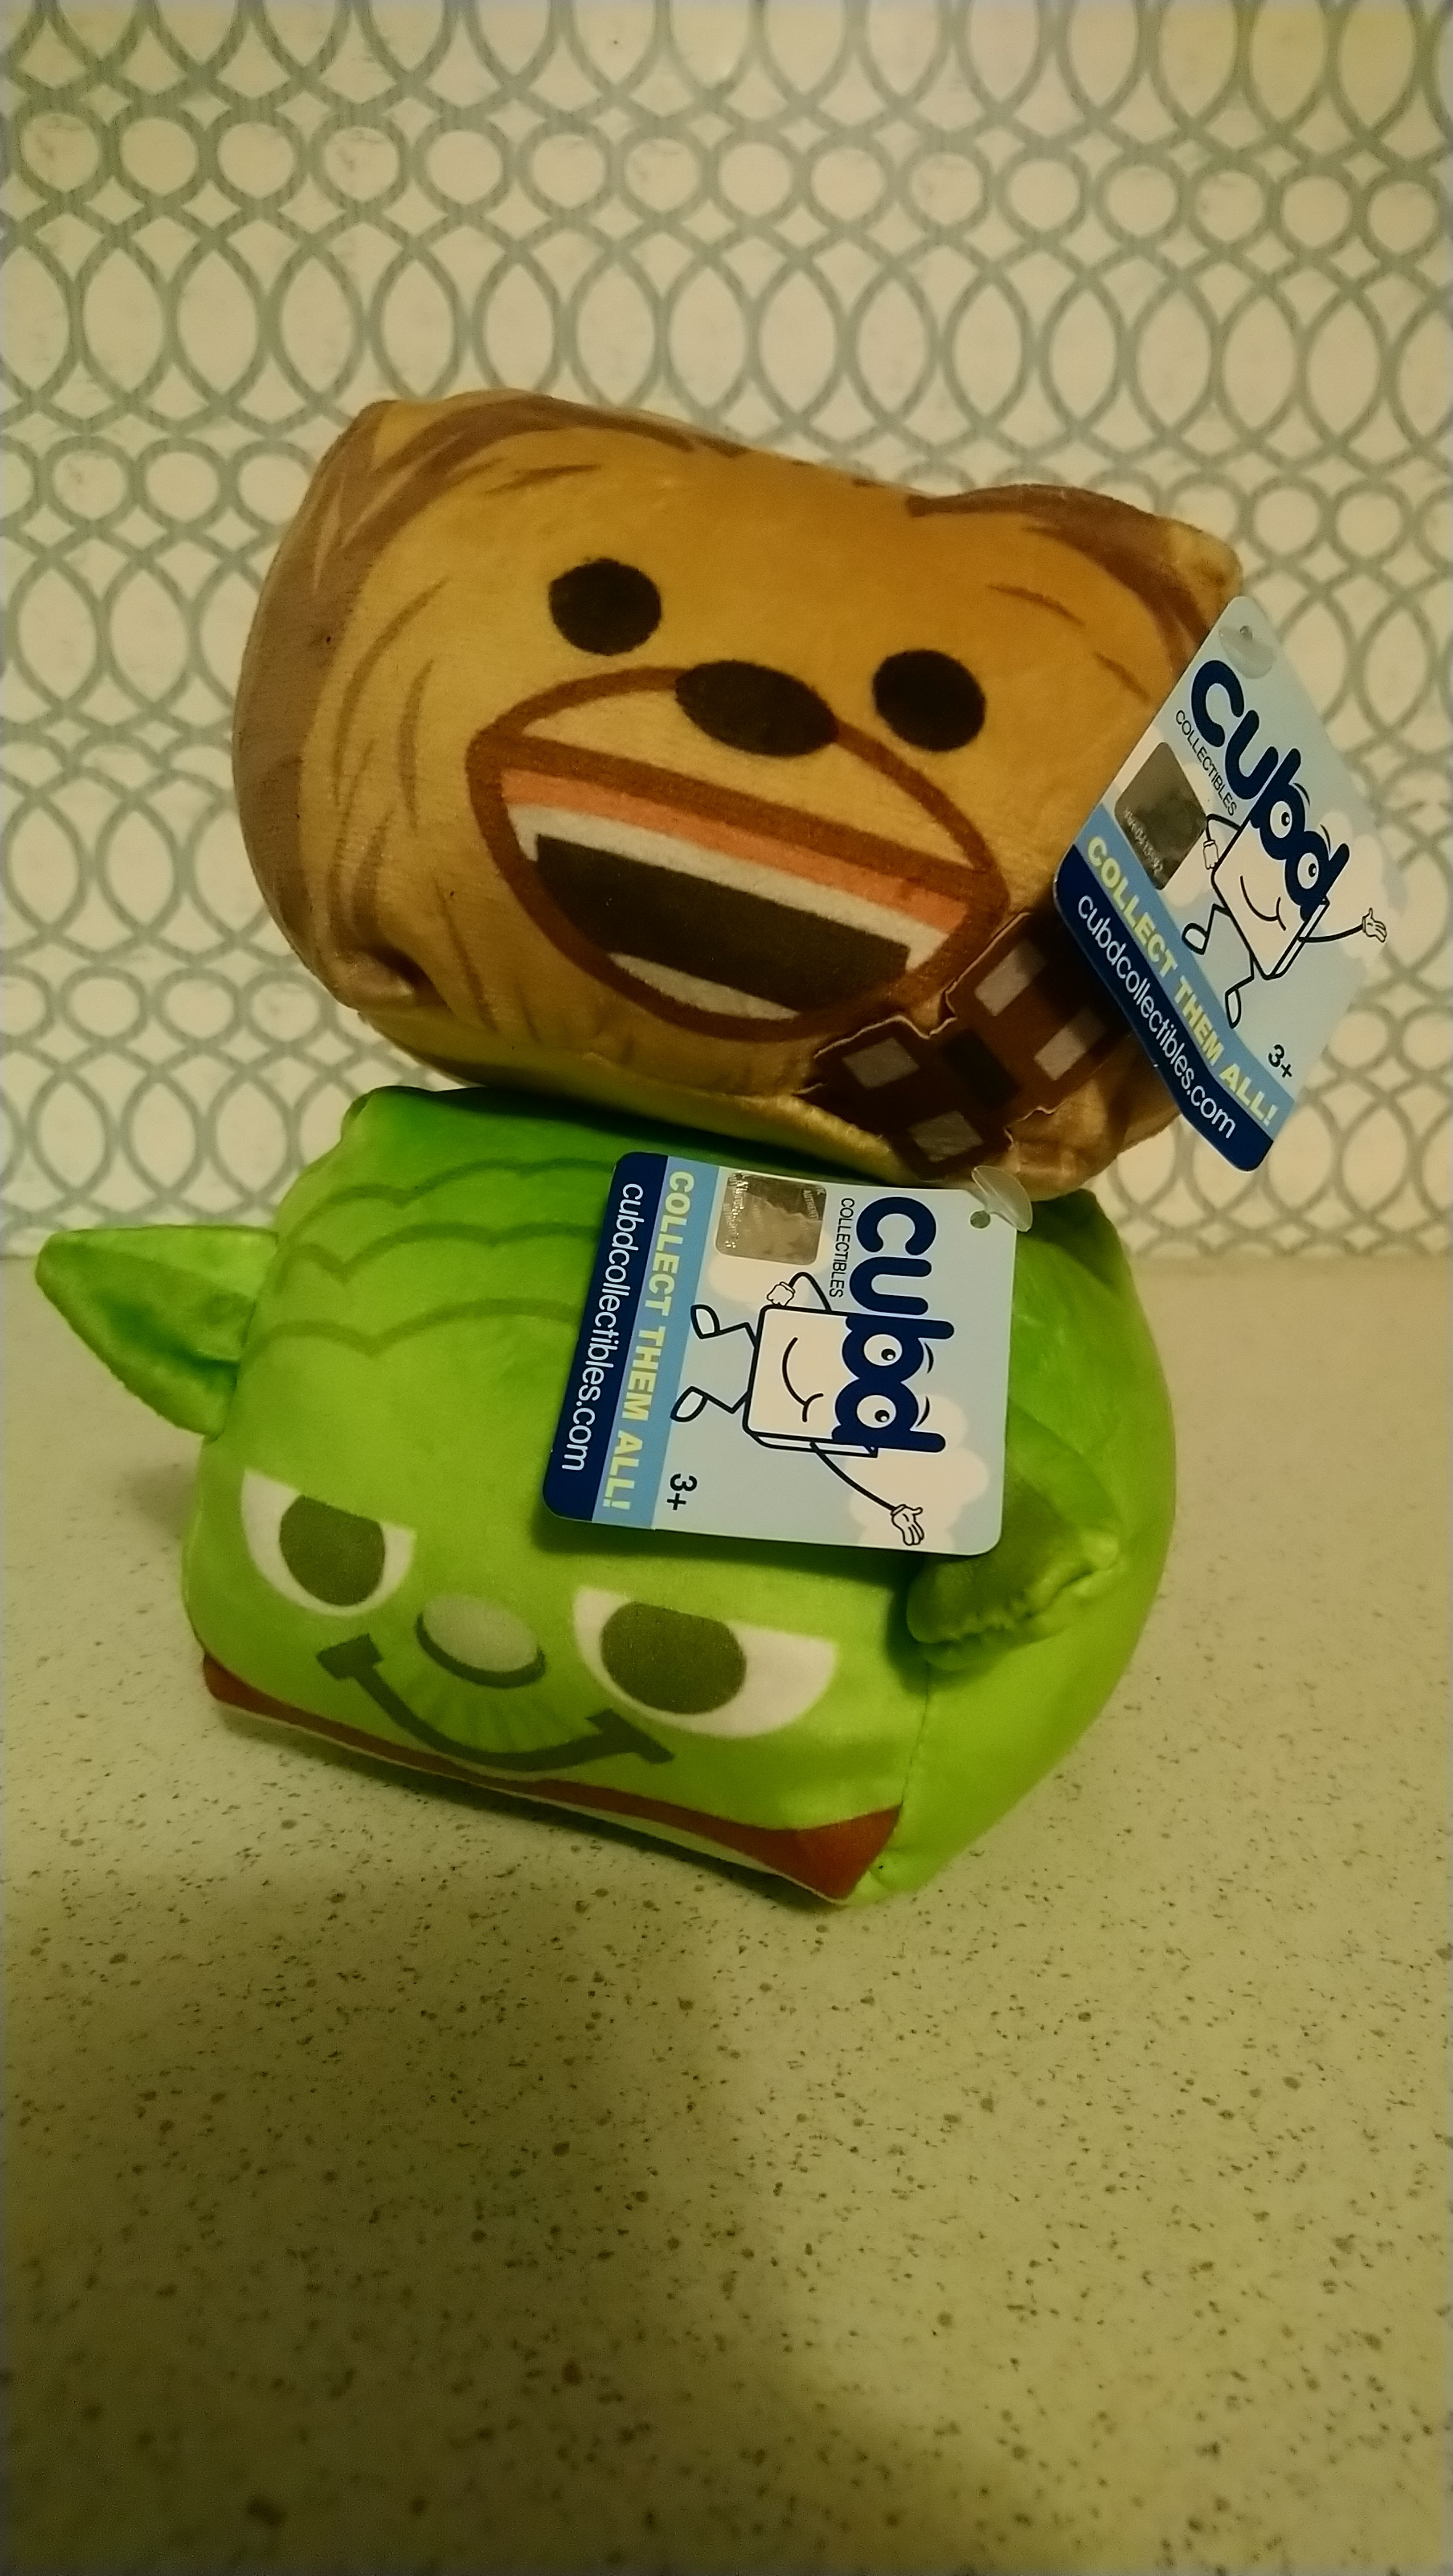 Cubd collectible Star wars Yoda and Chewbacca plushie.